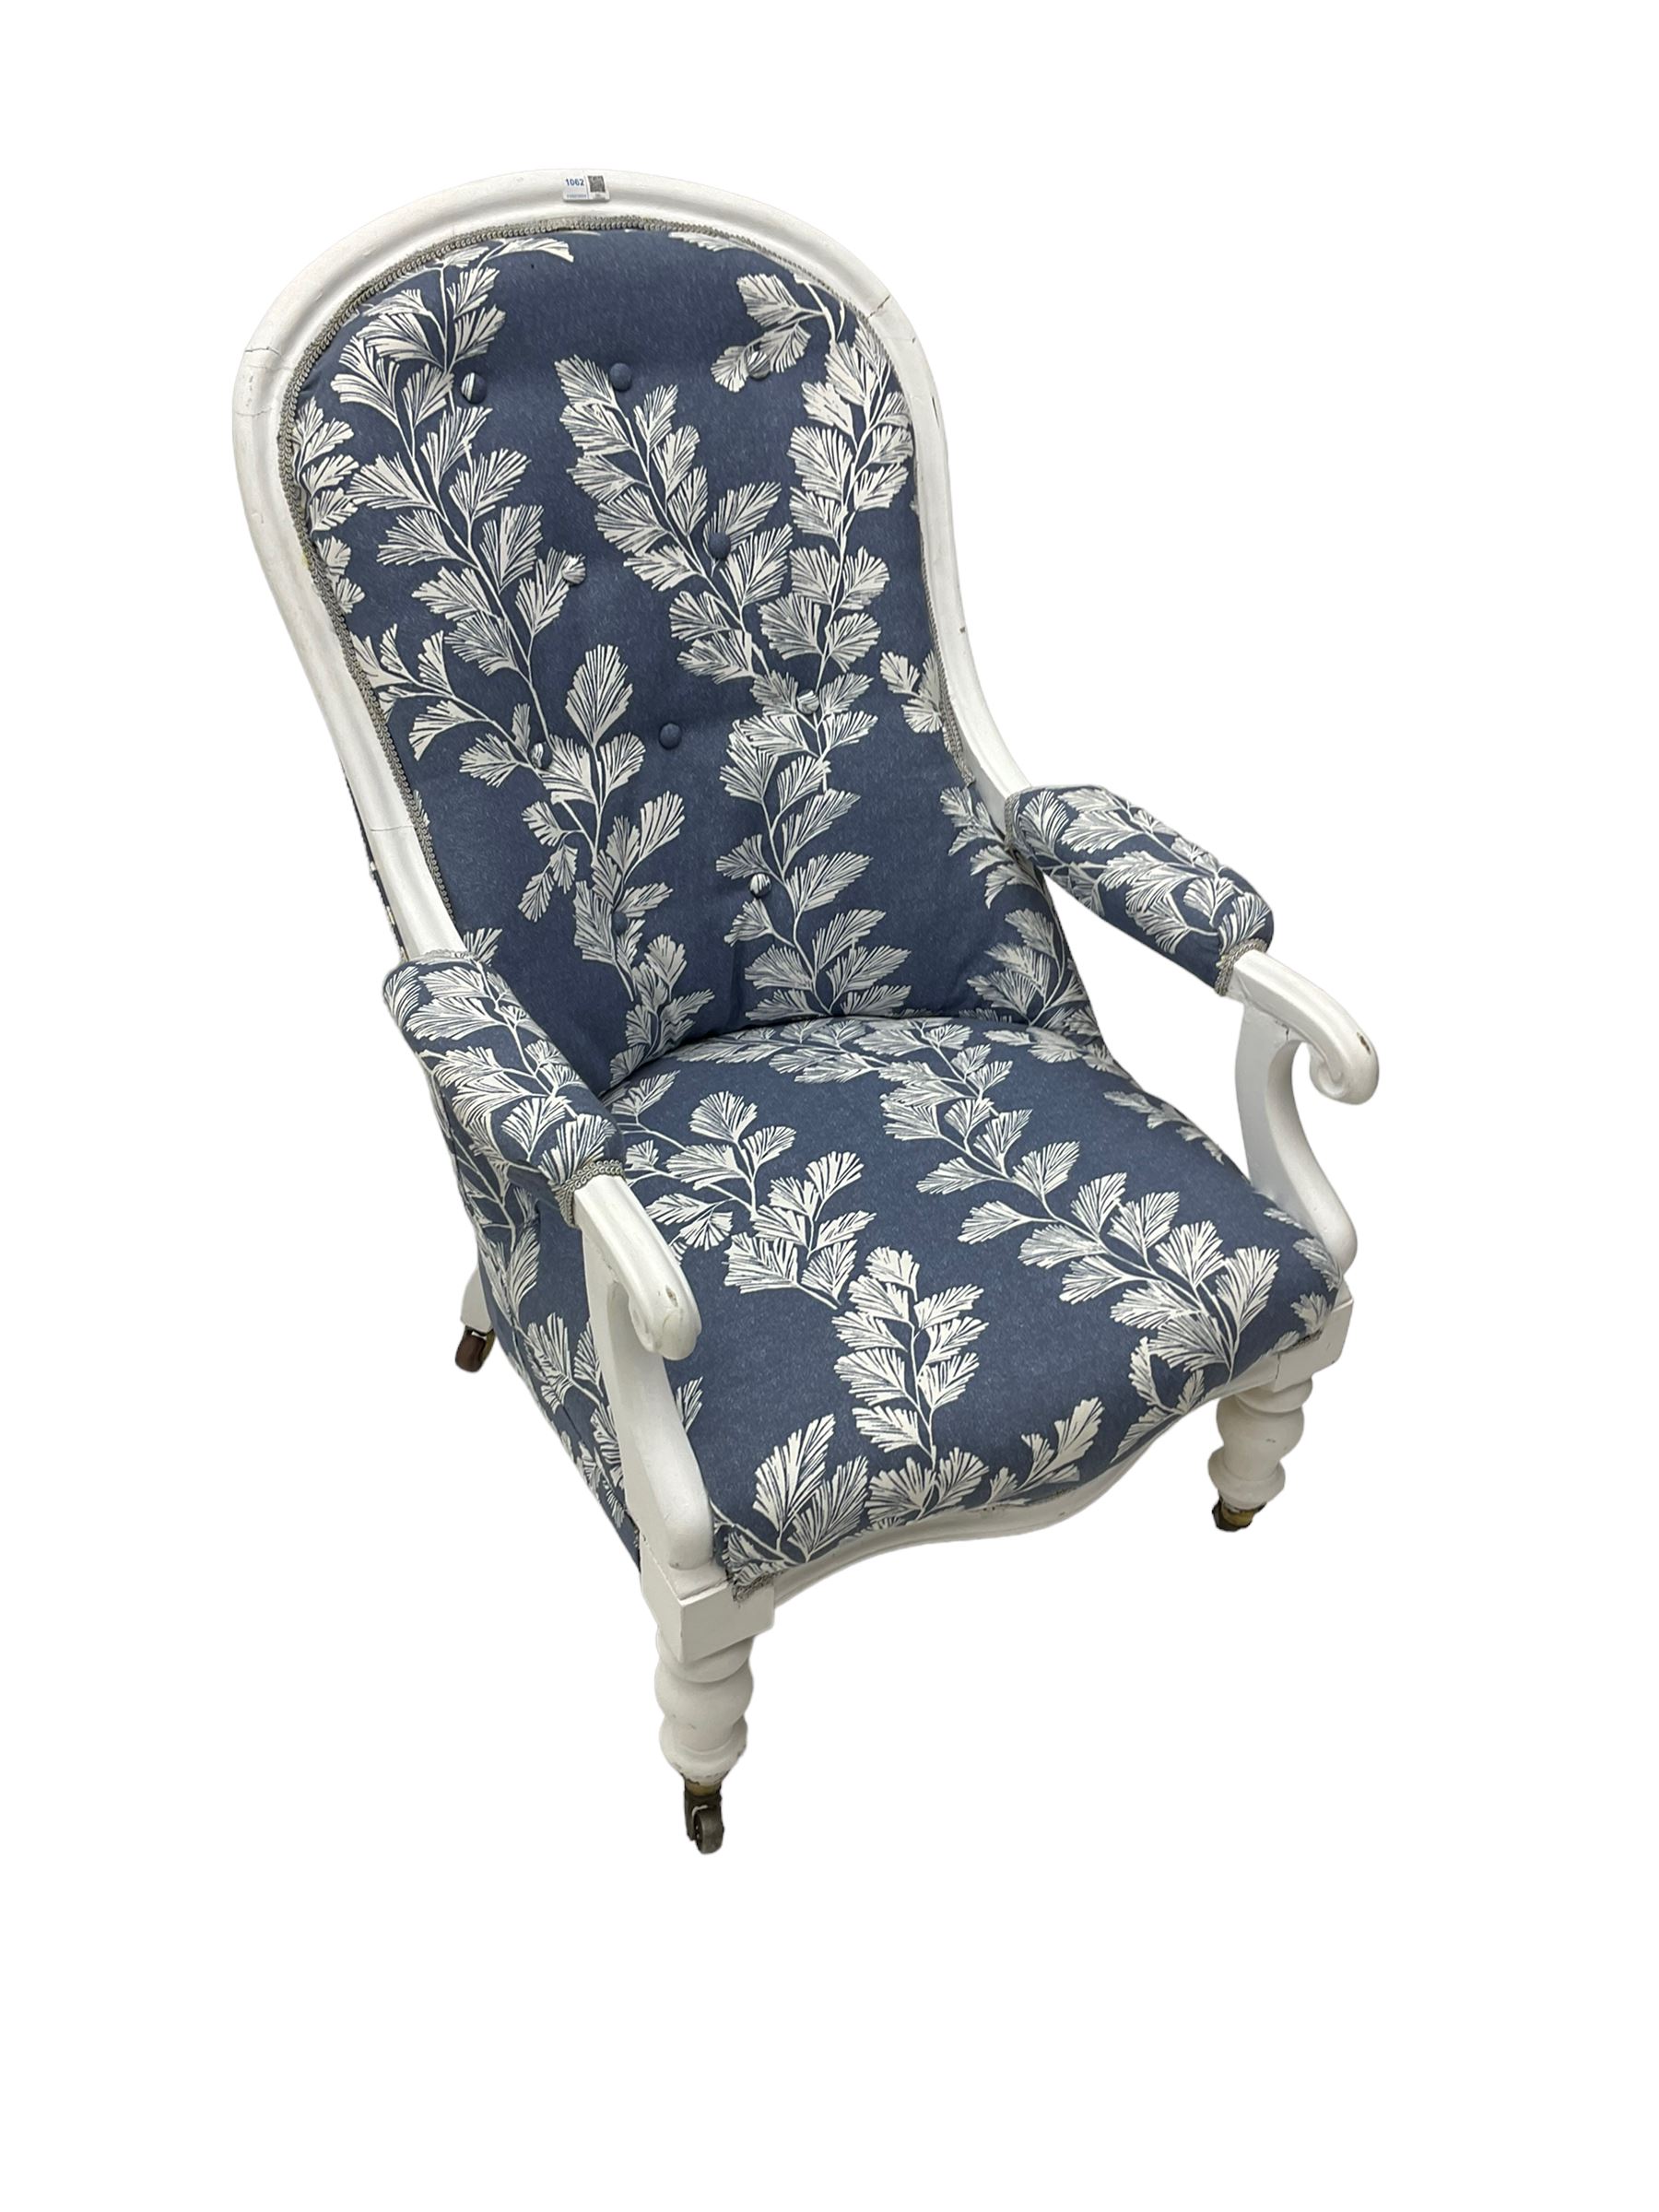 Late 19th century white painted armchair - Image 3 of 6